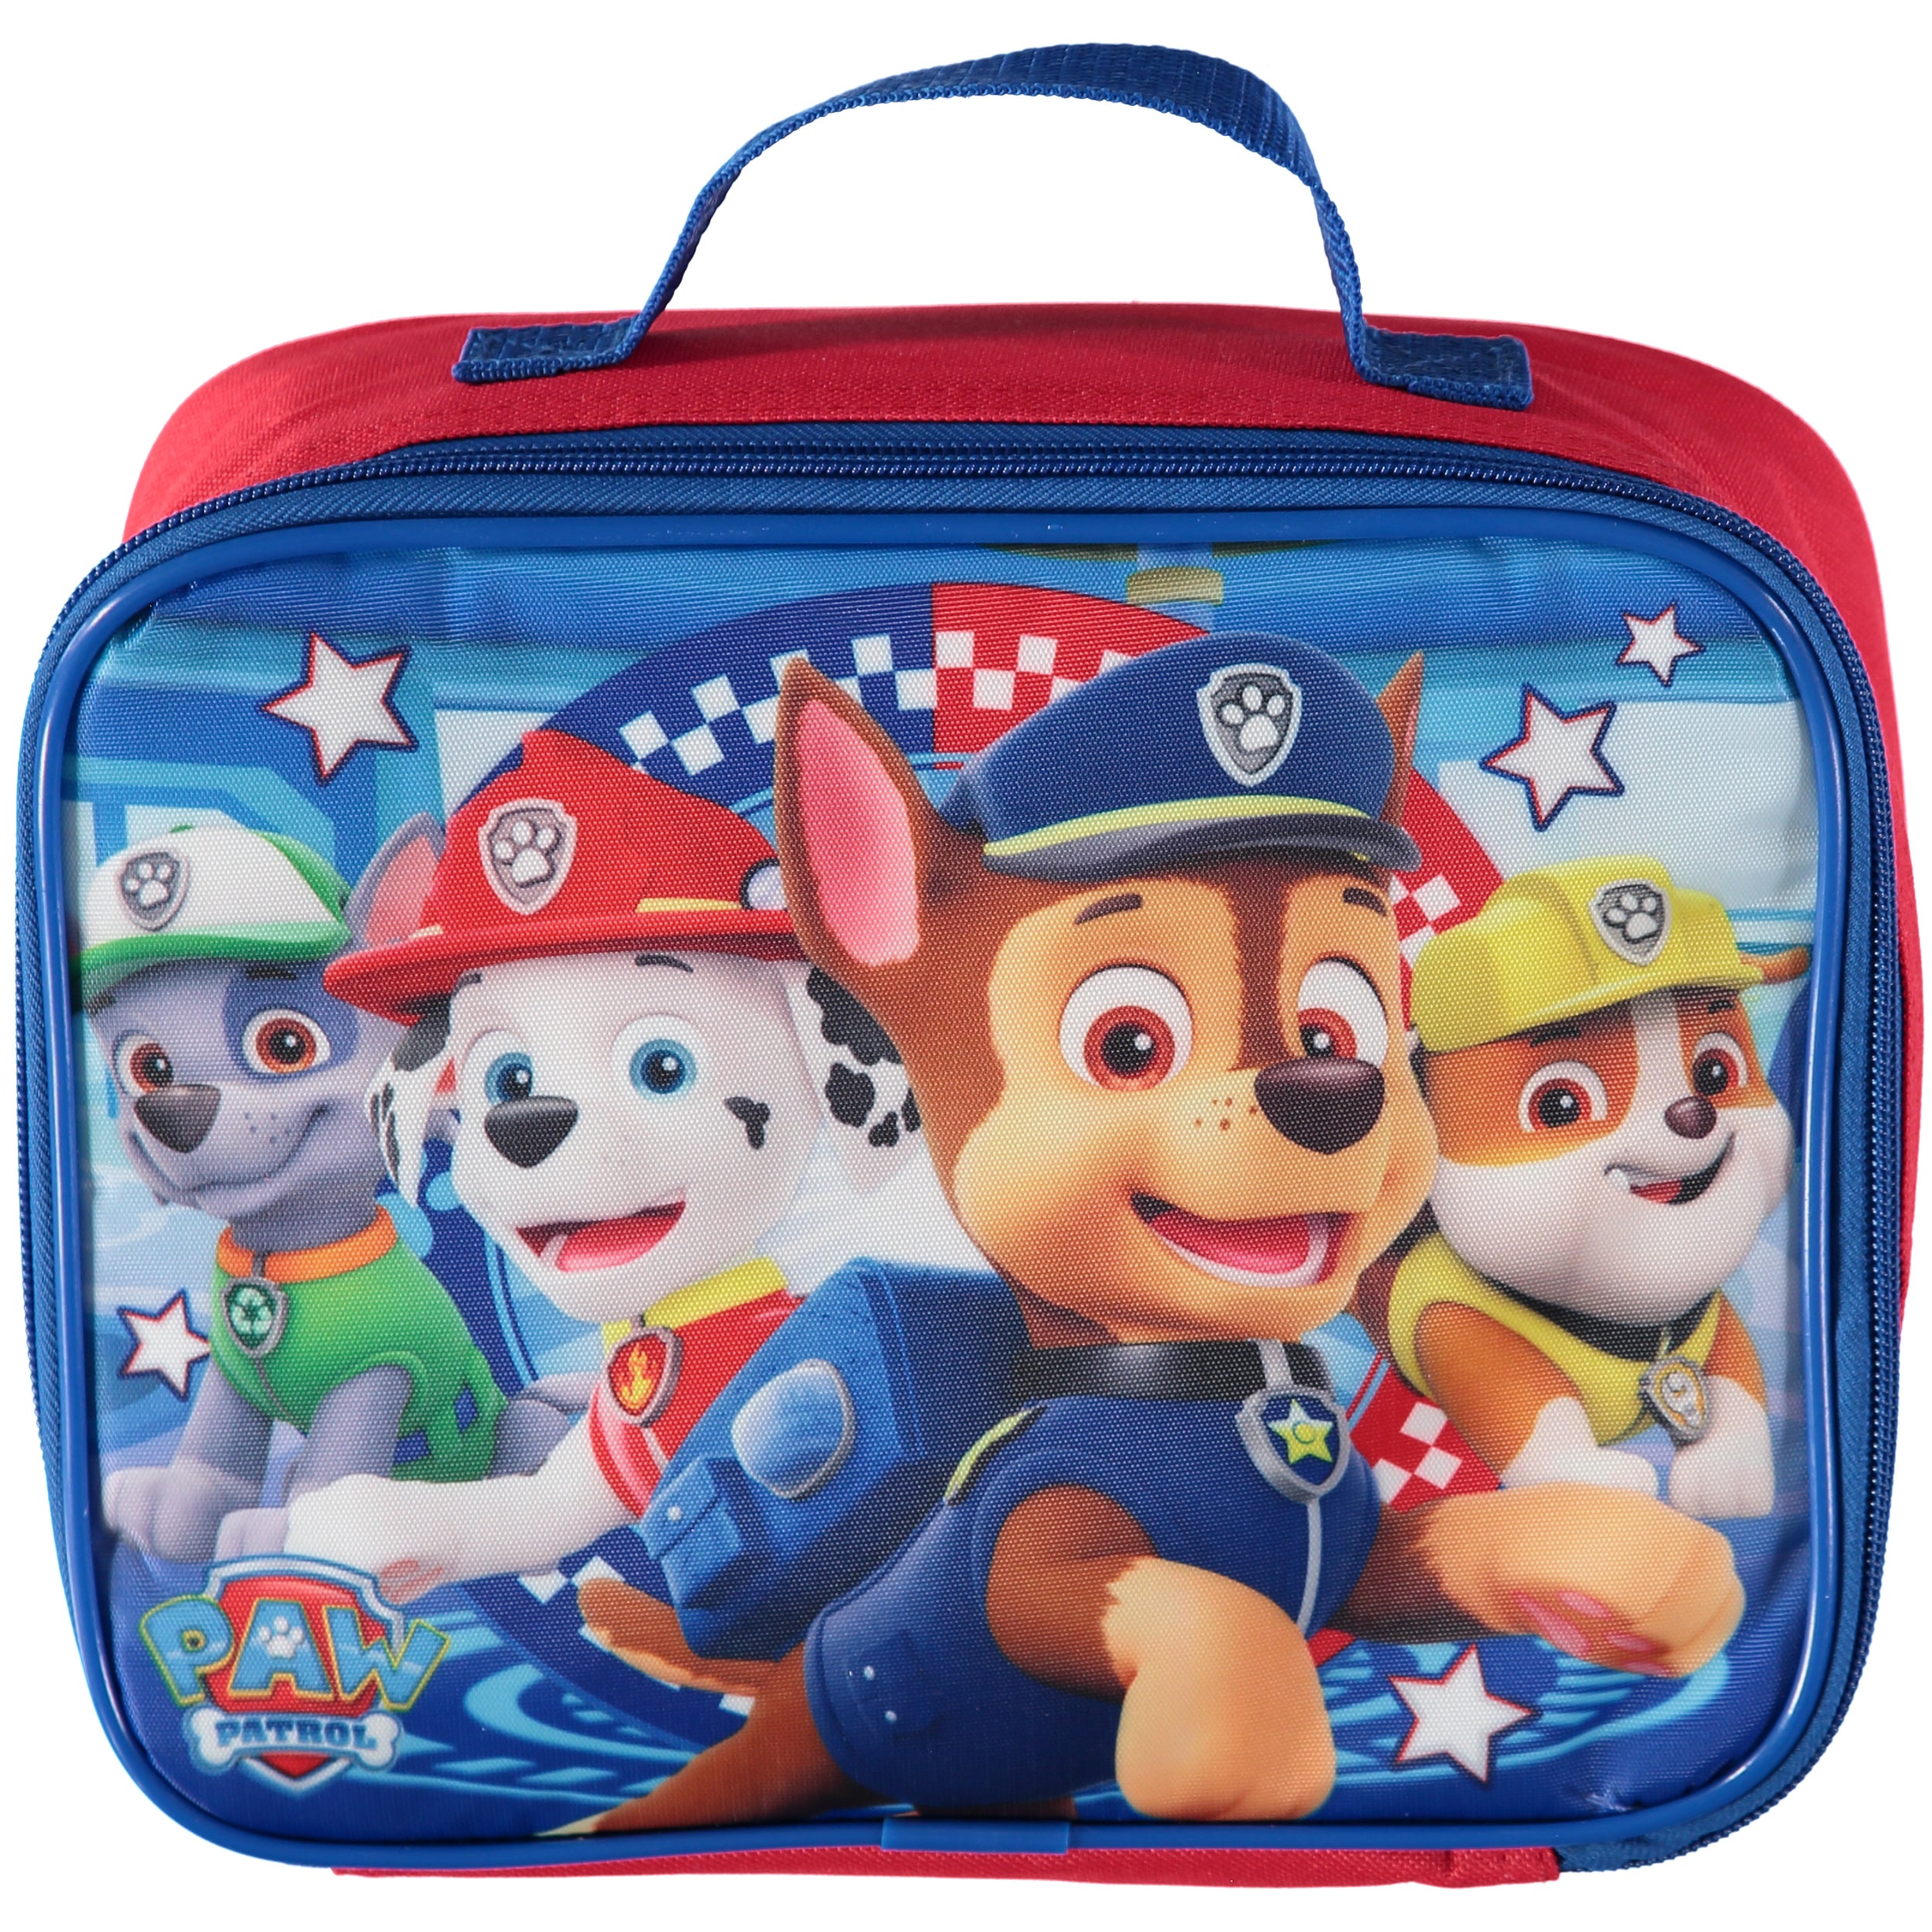 Paw Patrol Girl's Soft Insulated School Lunch Box (One size, Pink)